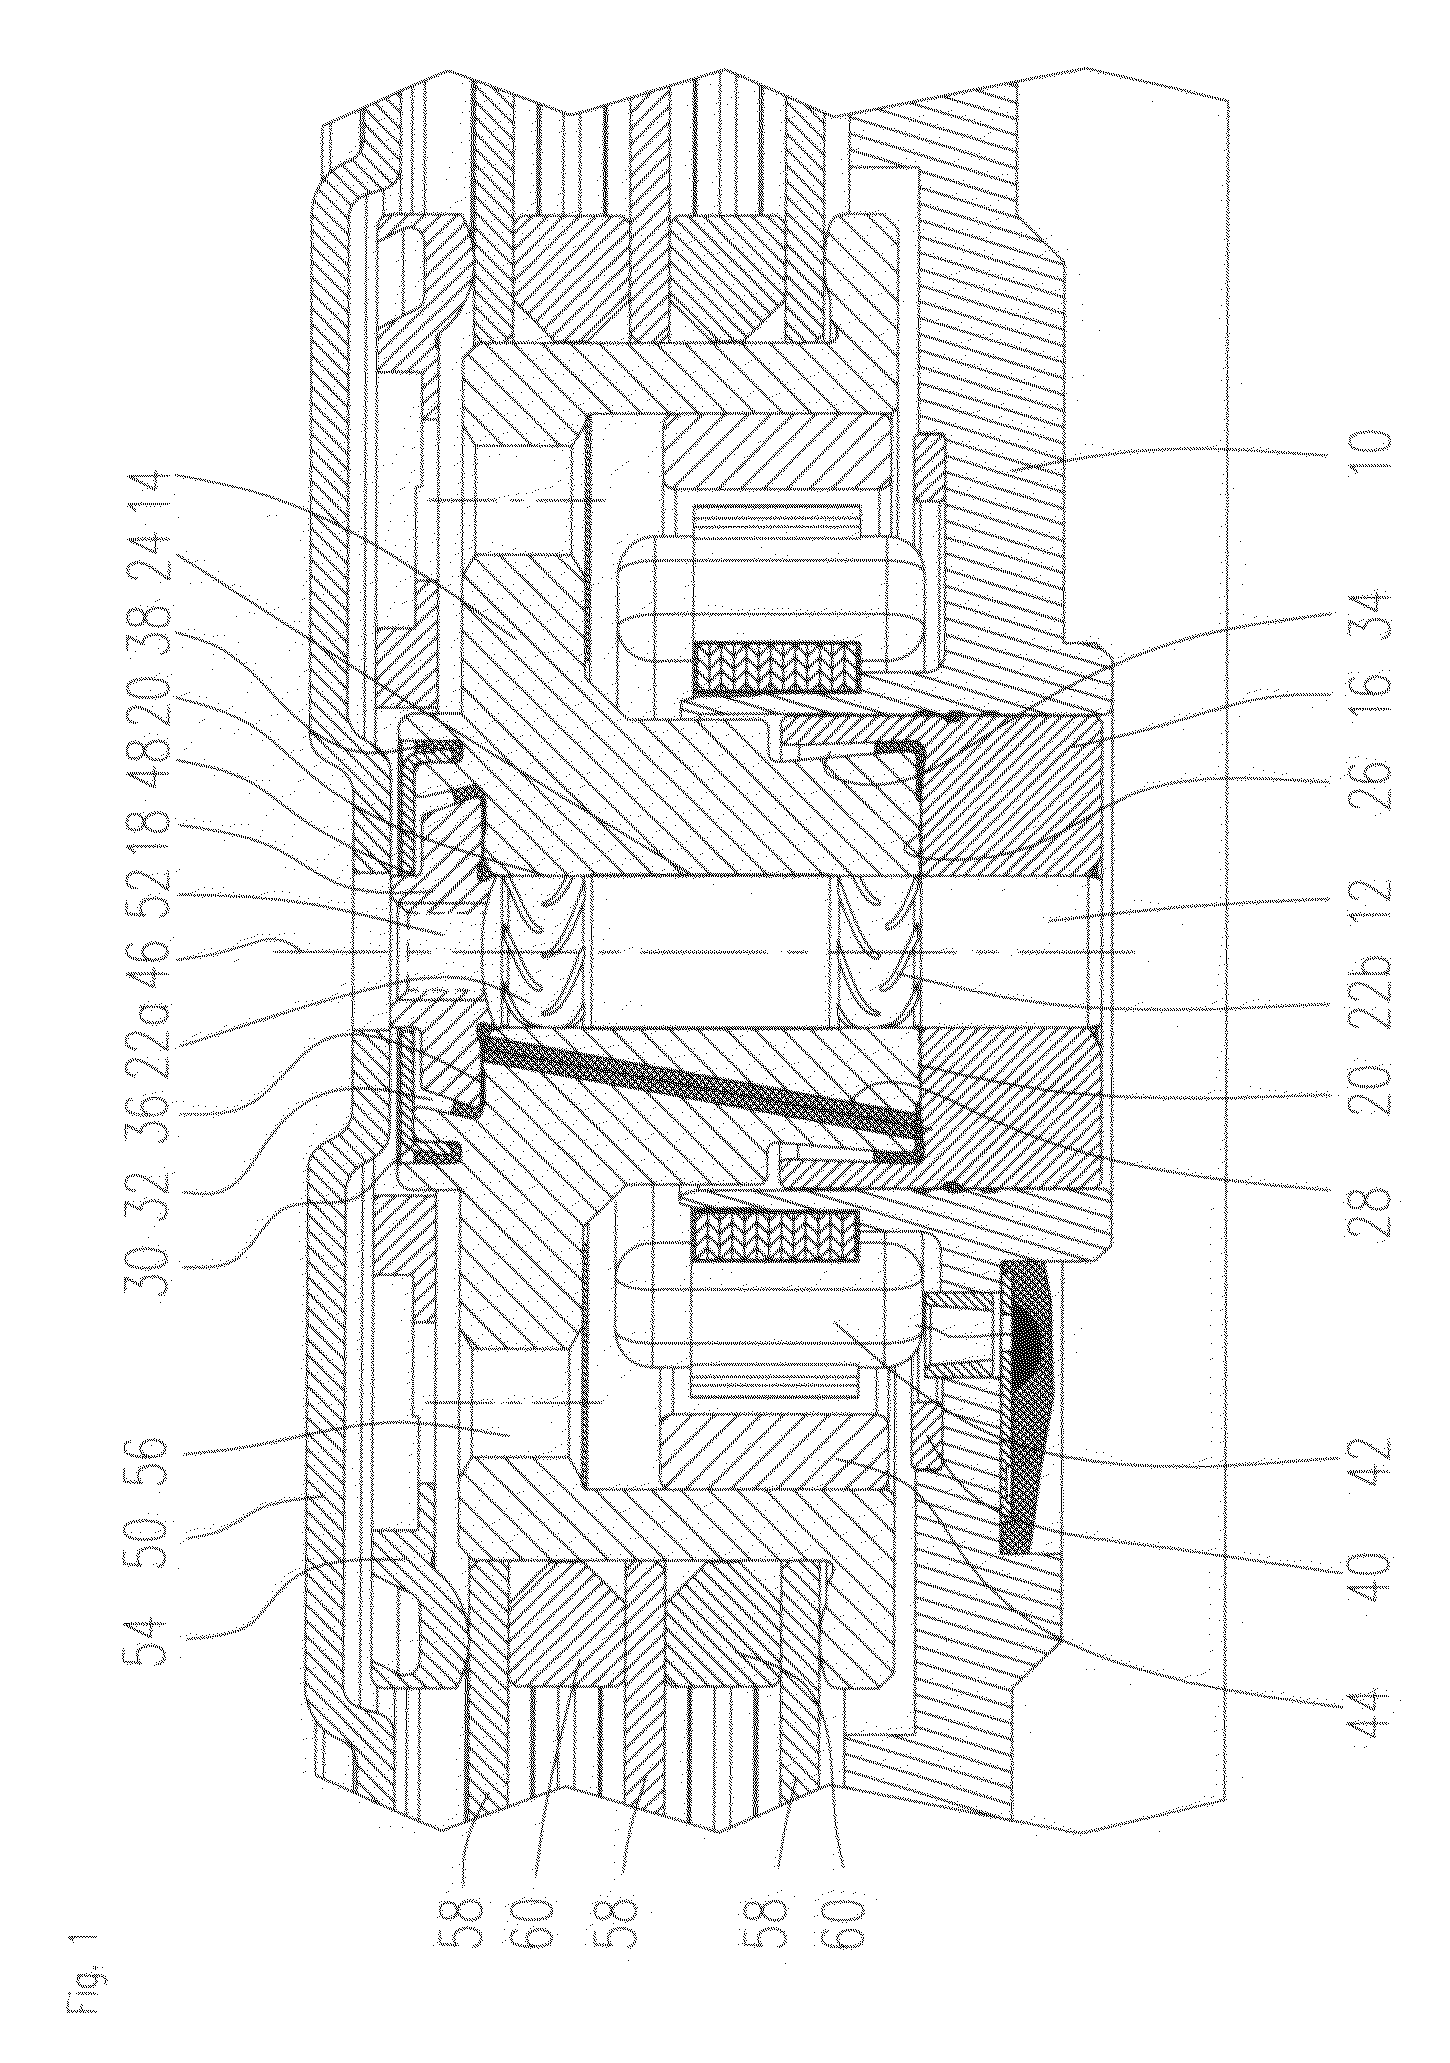 Spindle motor having a fluid dynamic bearing system and a stationary shaft